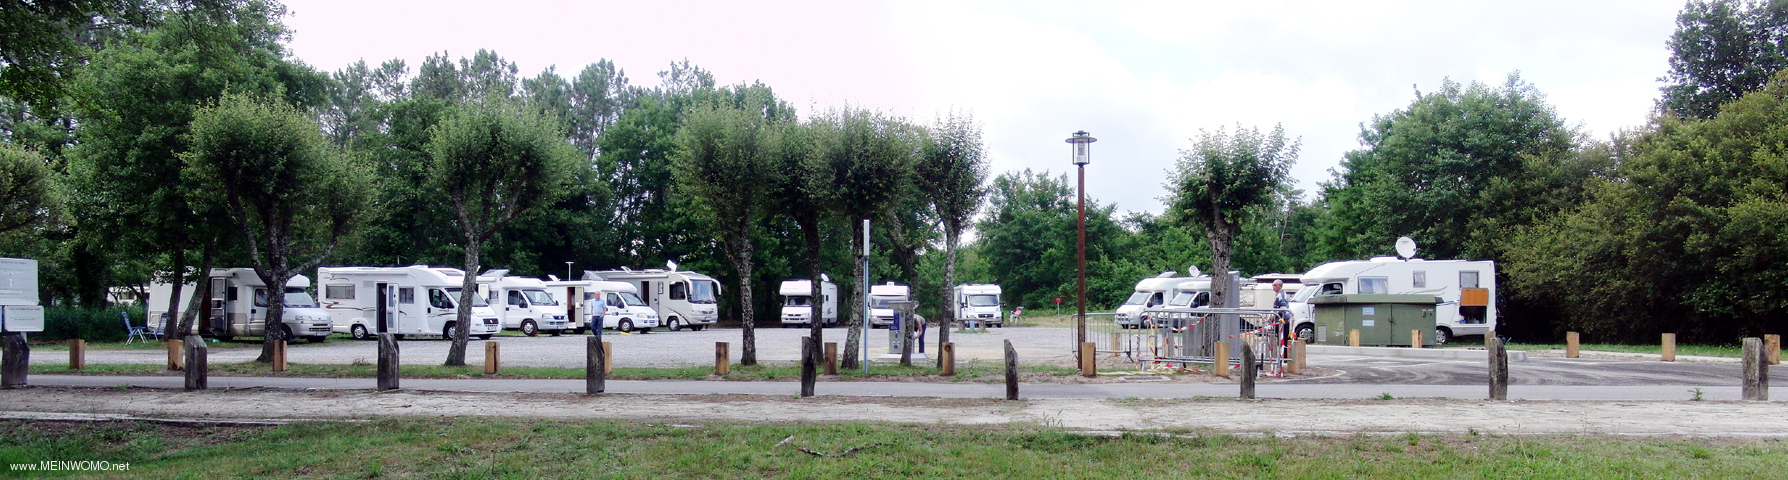  The whole parking lot in June 2010